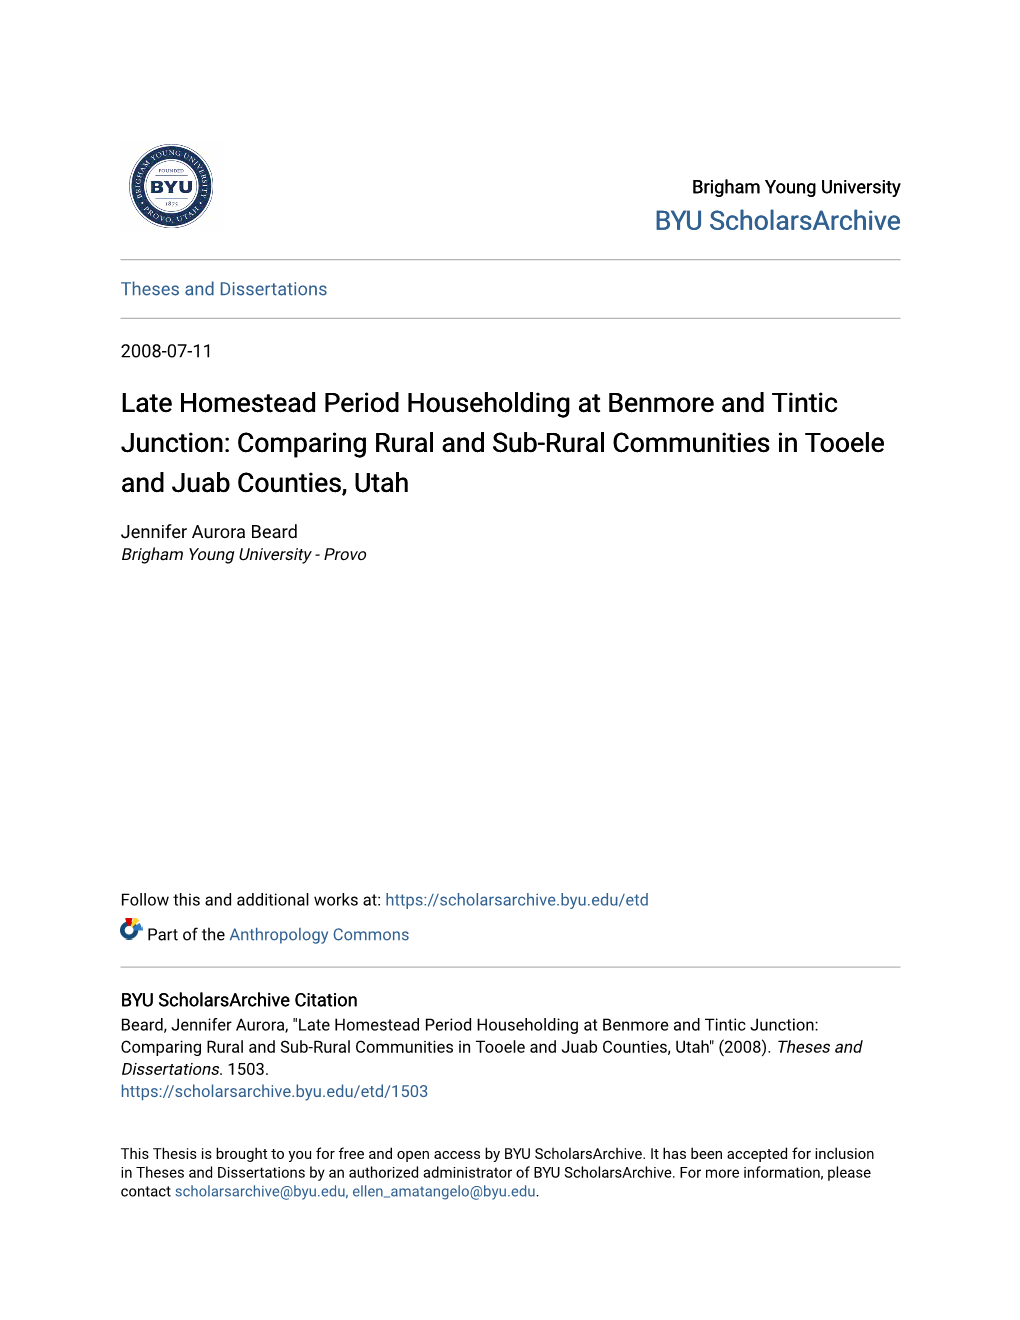 Late Homestead Period Householding at Benmore and Tintic Junction: Comparing Rural and Sub-Rural Communities in Tooele and Juab Counties, Utah